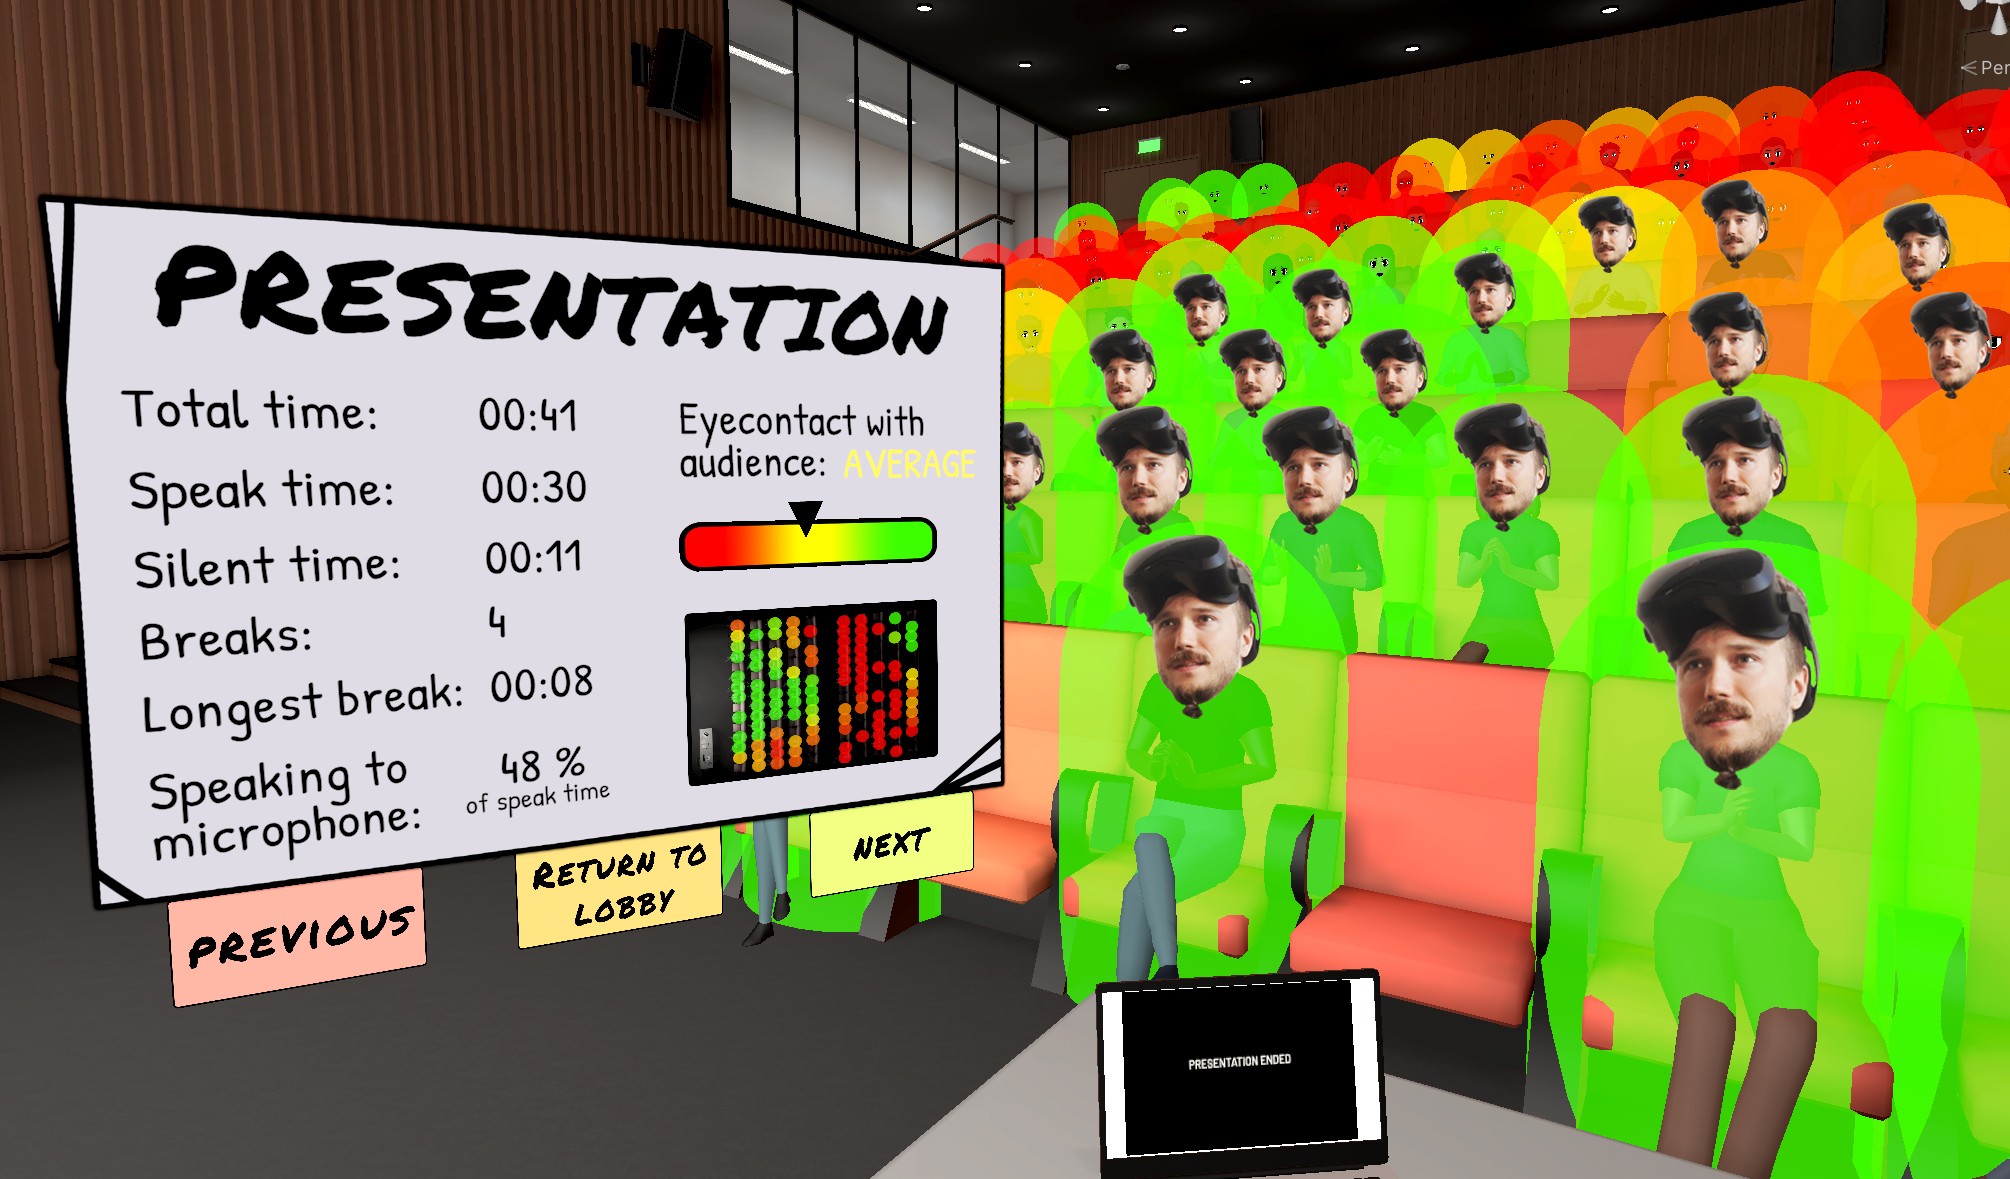 A screenshot of the PedaXR - Presentation Simulation with which Helsinki XR Center's intern Jesse Kosunen worked with during spring 2023. The image shows data with numbers and colours of how the presentation simulation went, based on e.g. how much eyecontact the speaker had with the audience. The image has been edited so that there's Jesse Kosunen's face on all of the people in the audience.